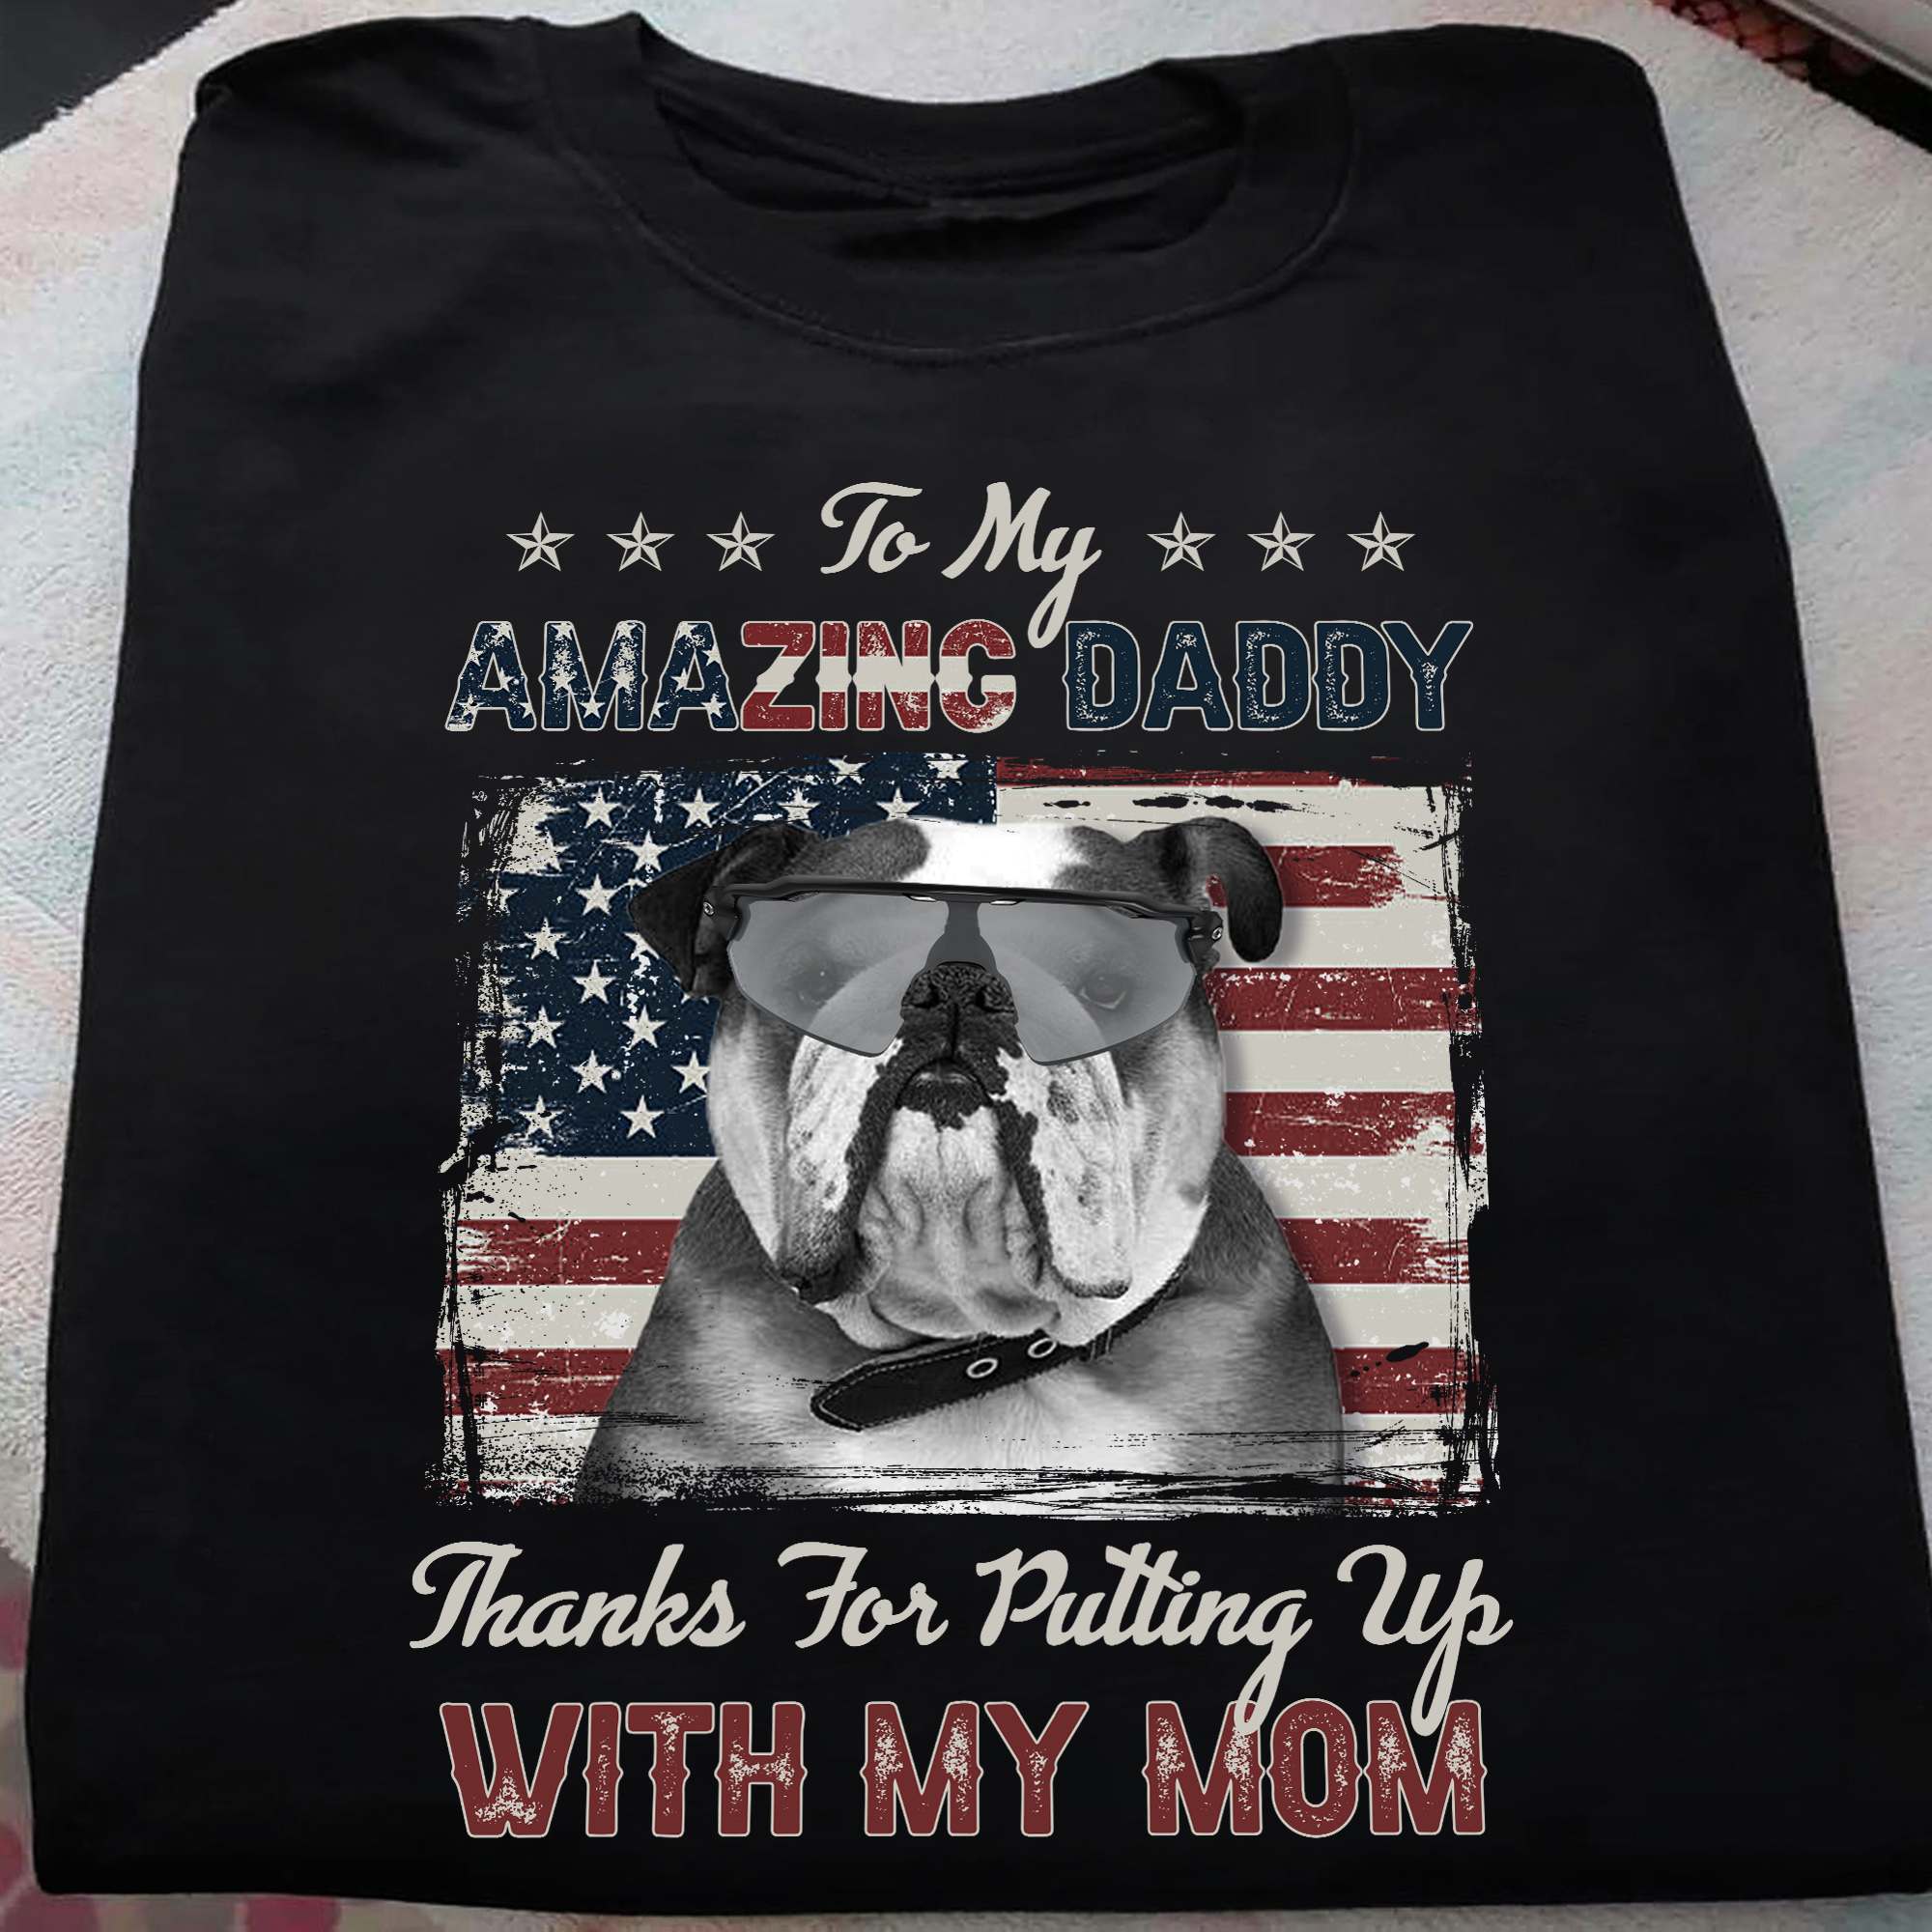 To my amazing daddy thanks for putting up with my mom - Bull dog, America flag